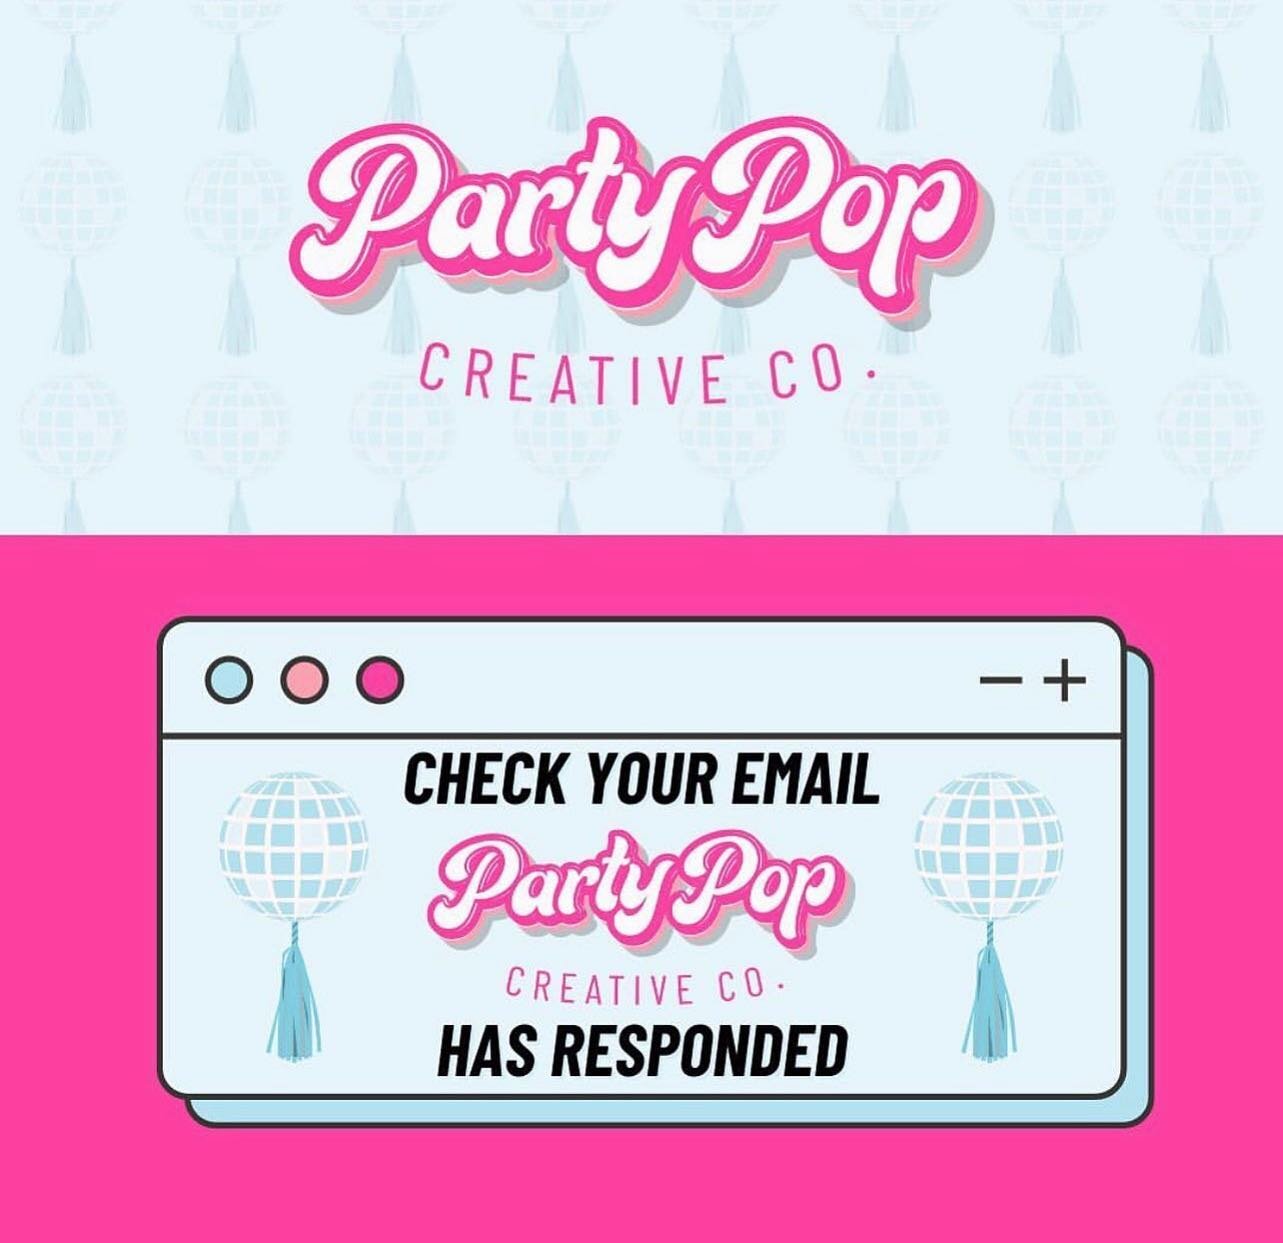 All inquires have been answered 💕 Check your email + check your spam so we can get your PARTY POPPIN&rsquo; 💕✨